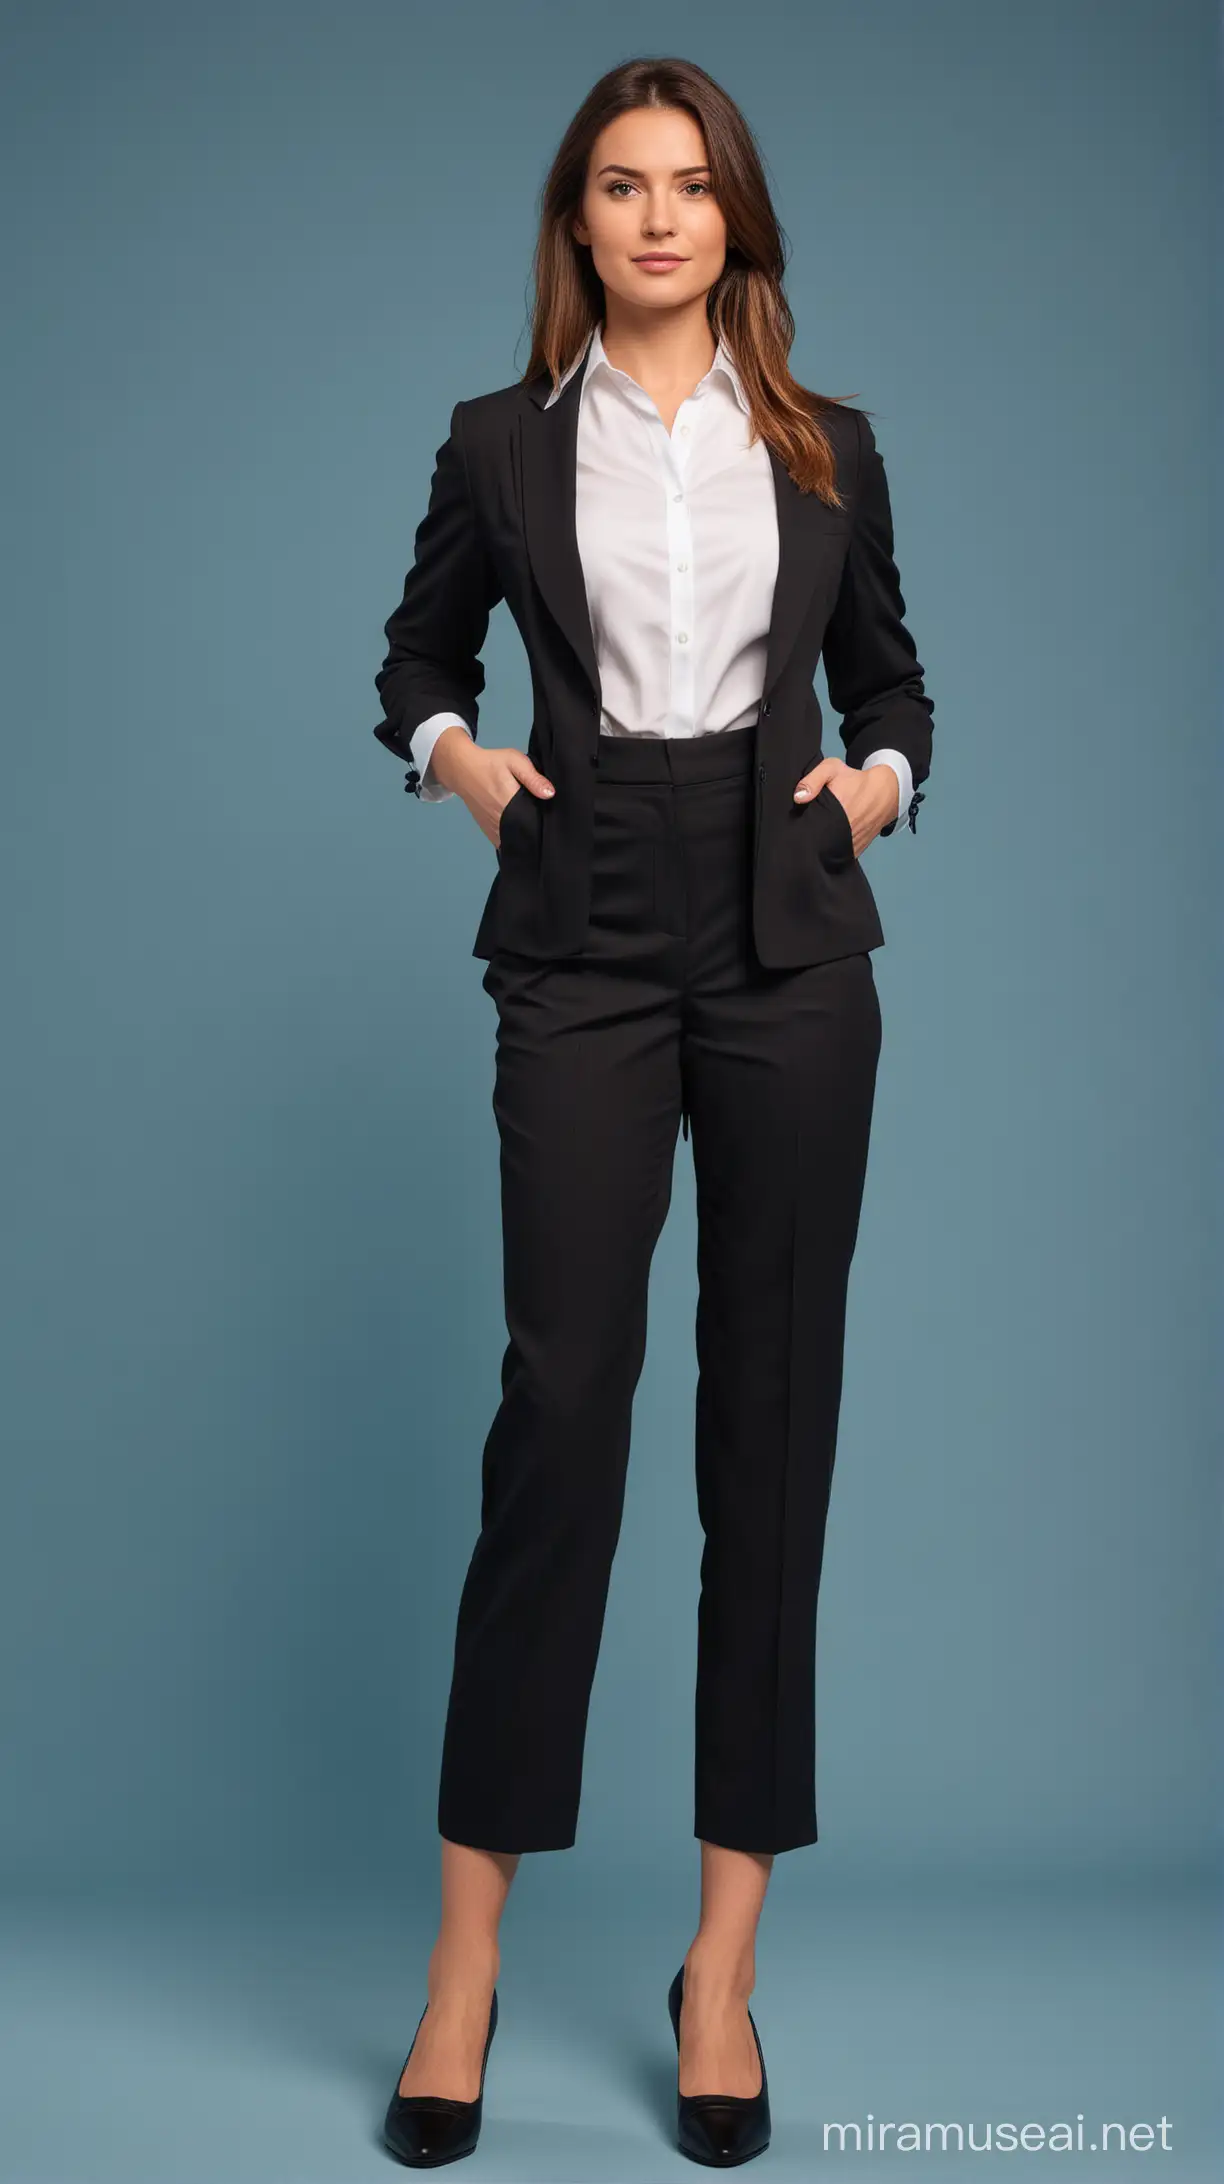 Confident Career Woman in Formal Attire on Blue Background